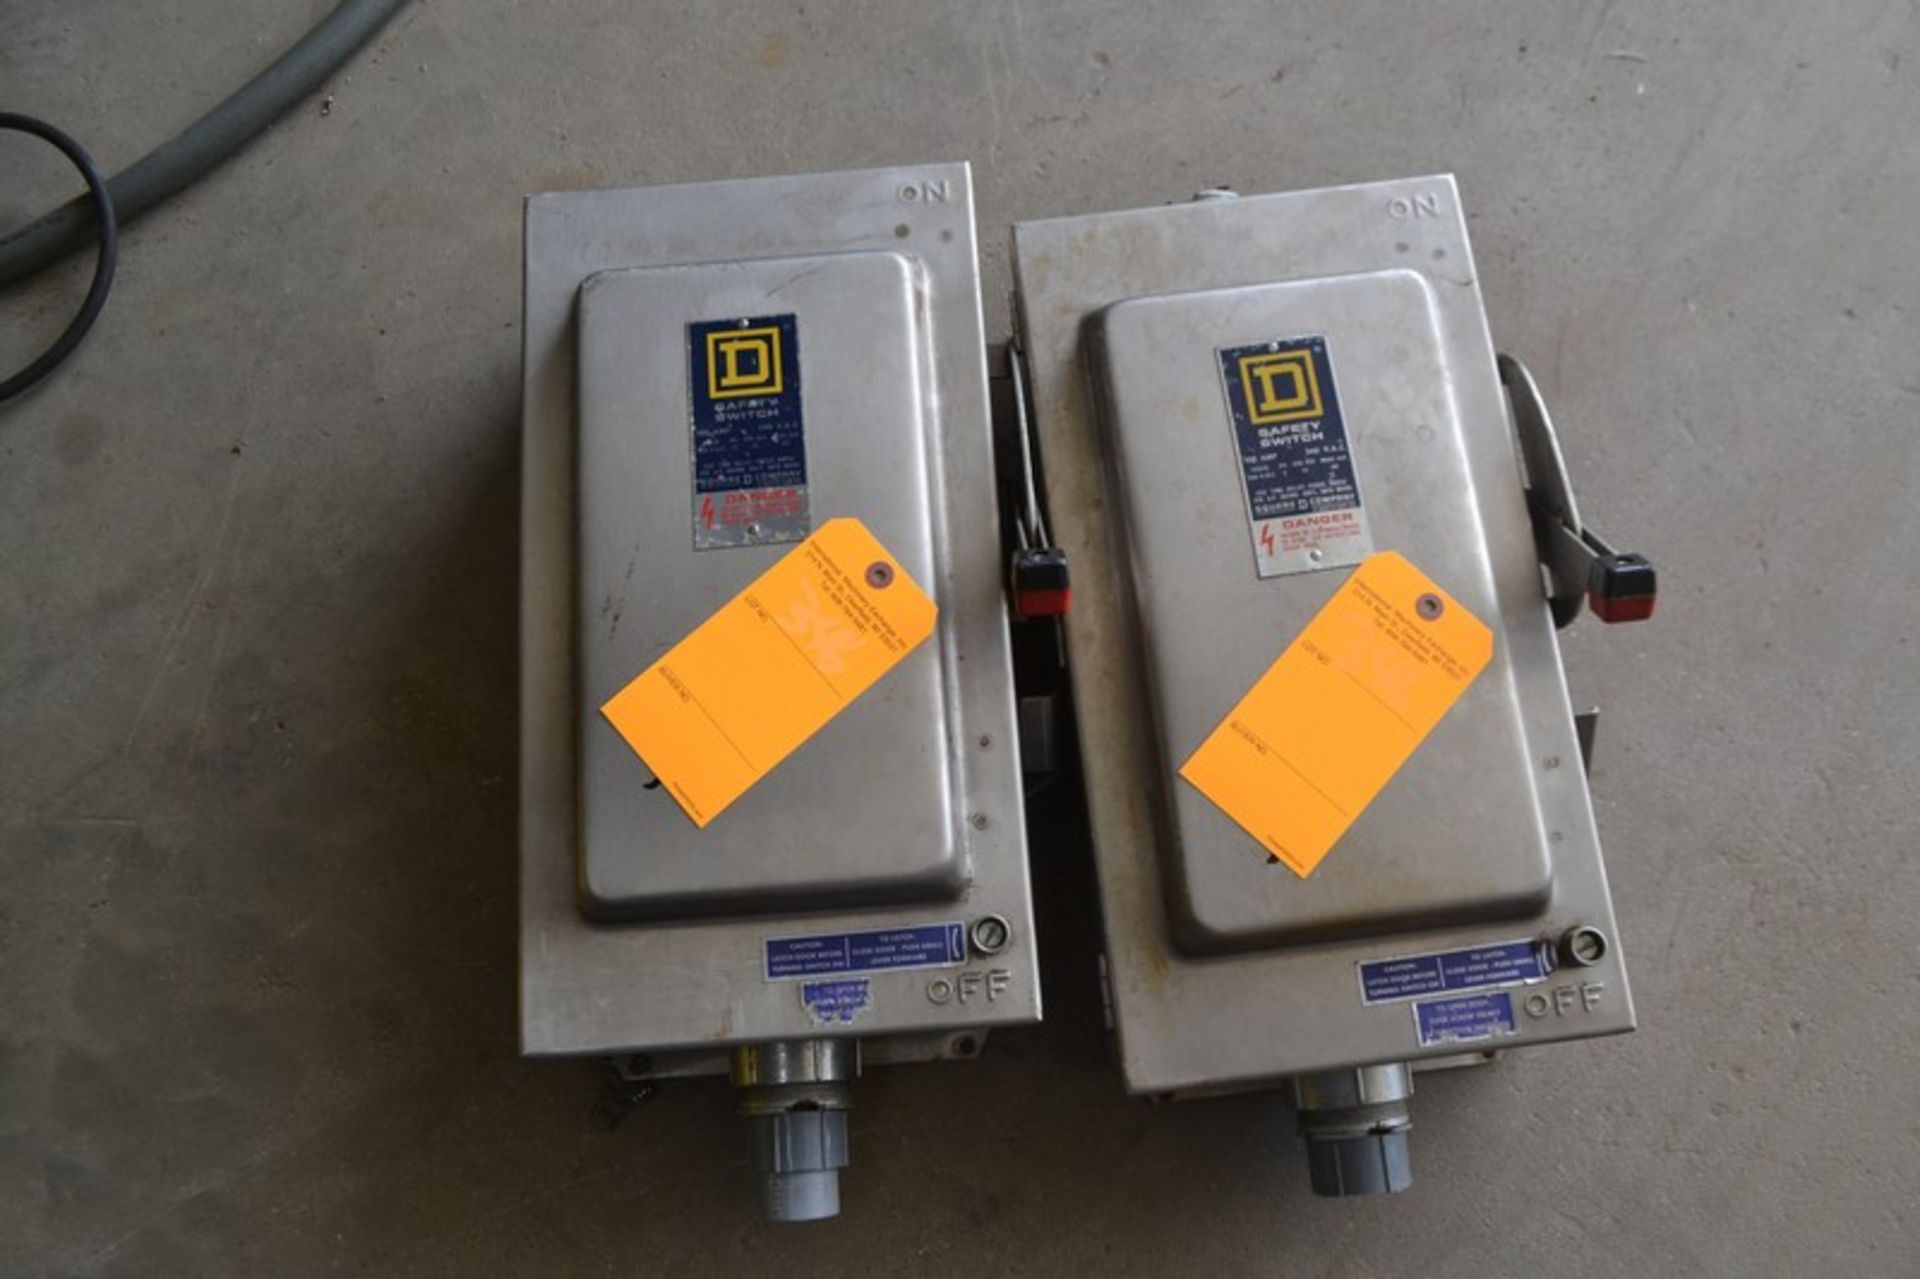 Lot of 2 All S/S Square D Disconnect Switches 100 Amp 240 Vac Rating Max 30 HP Rating. Required